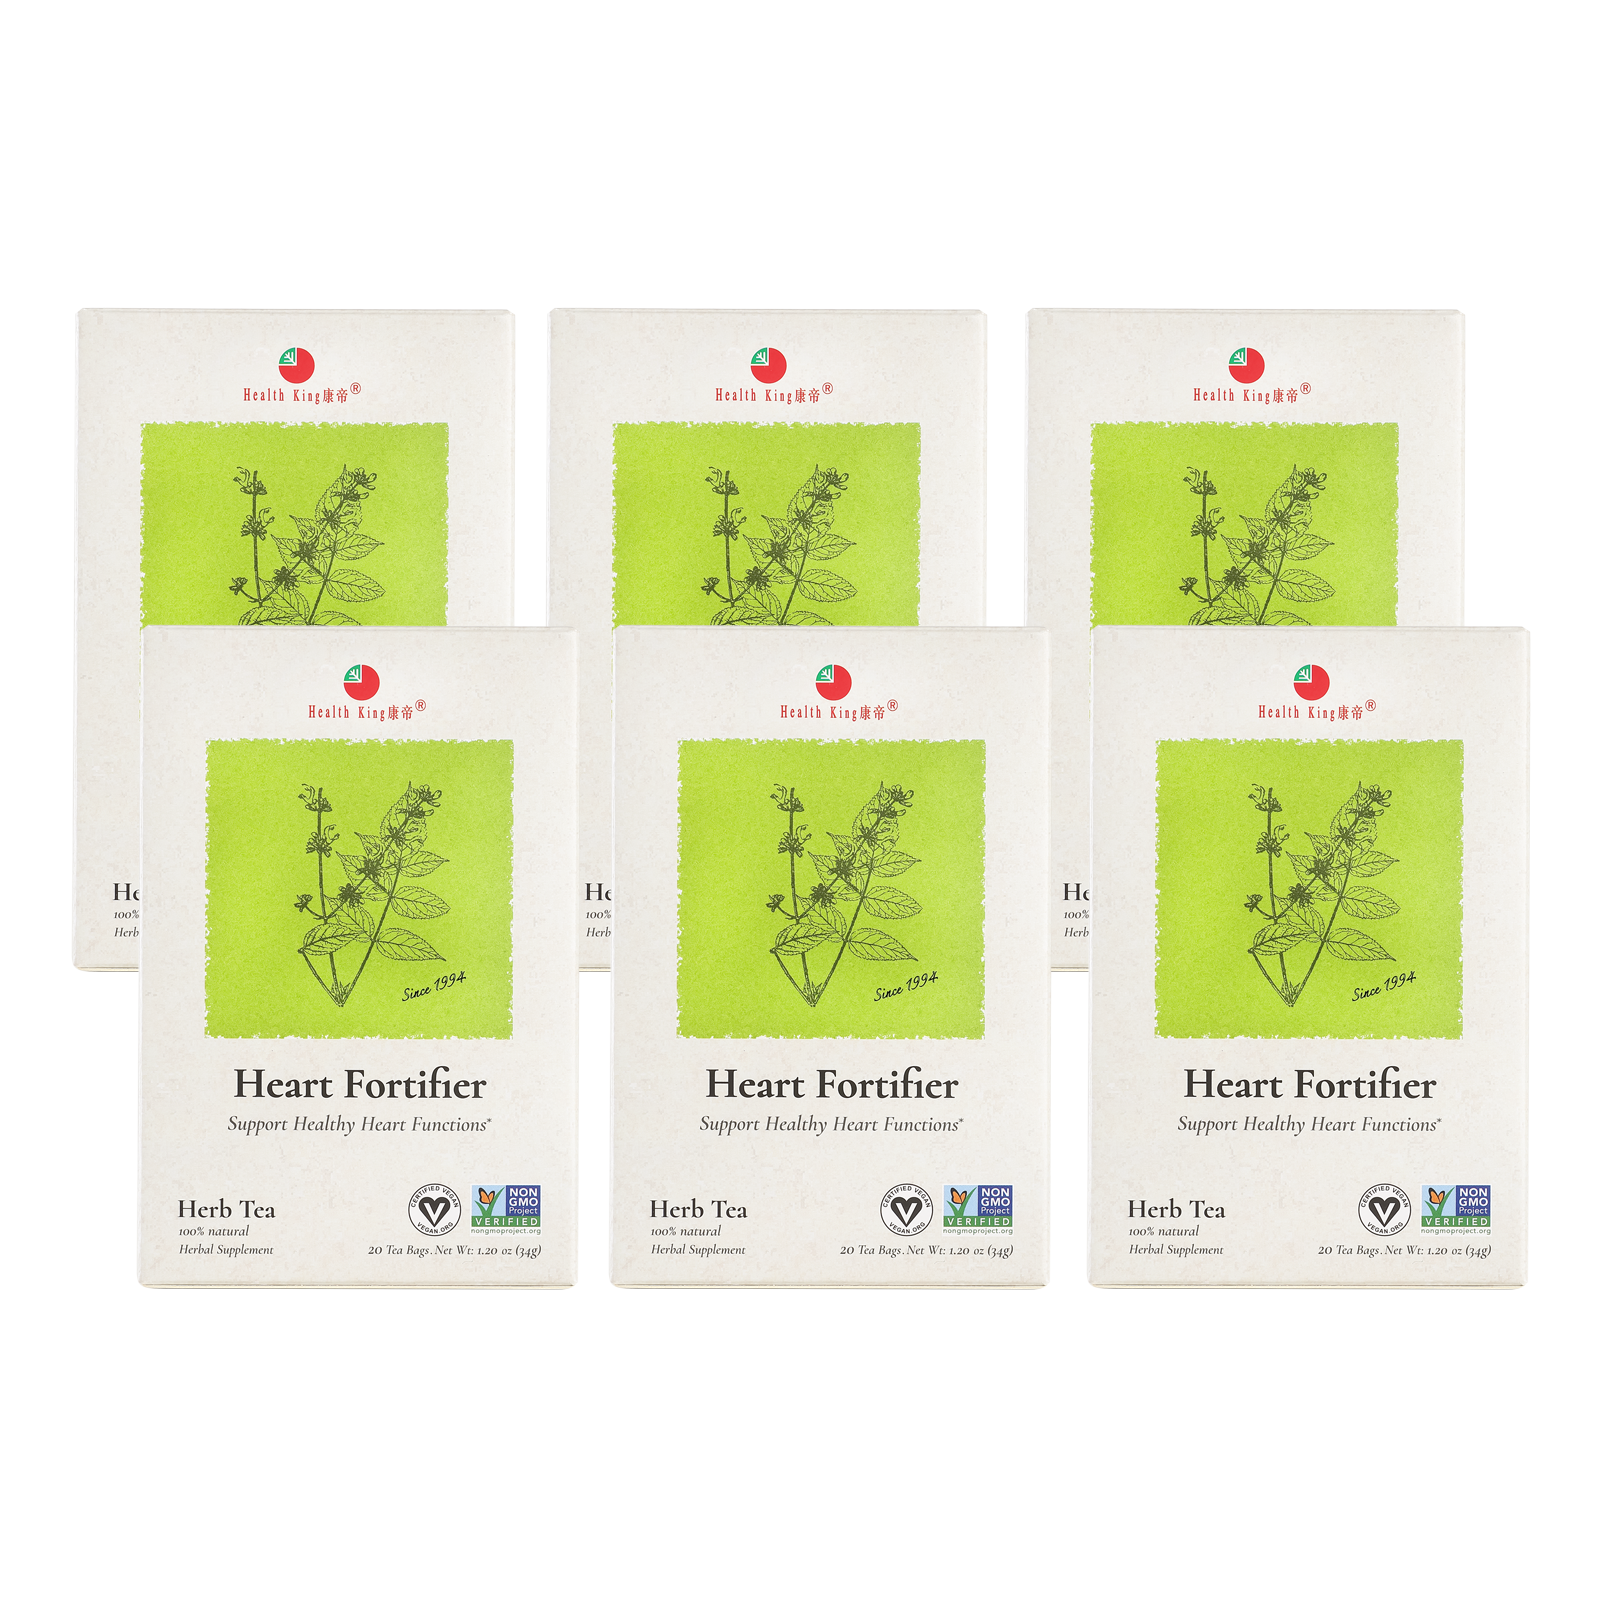 Six-pack of Heart Fortifier Herb Tea bags for cardiovascular support